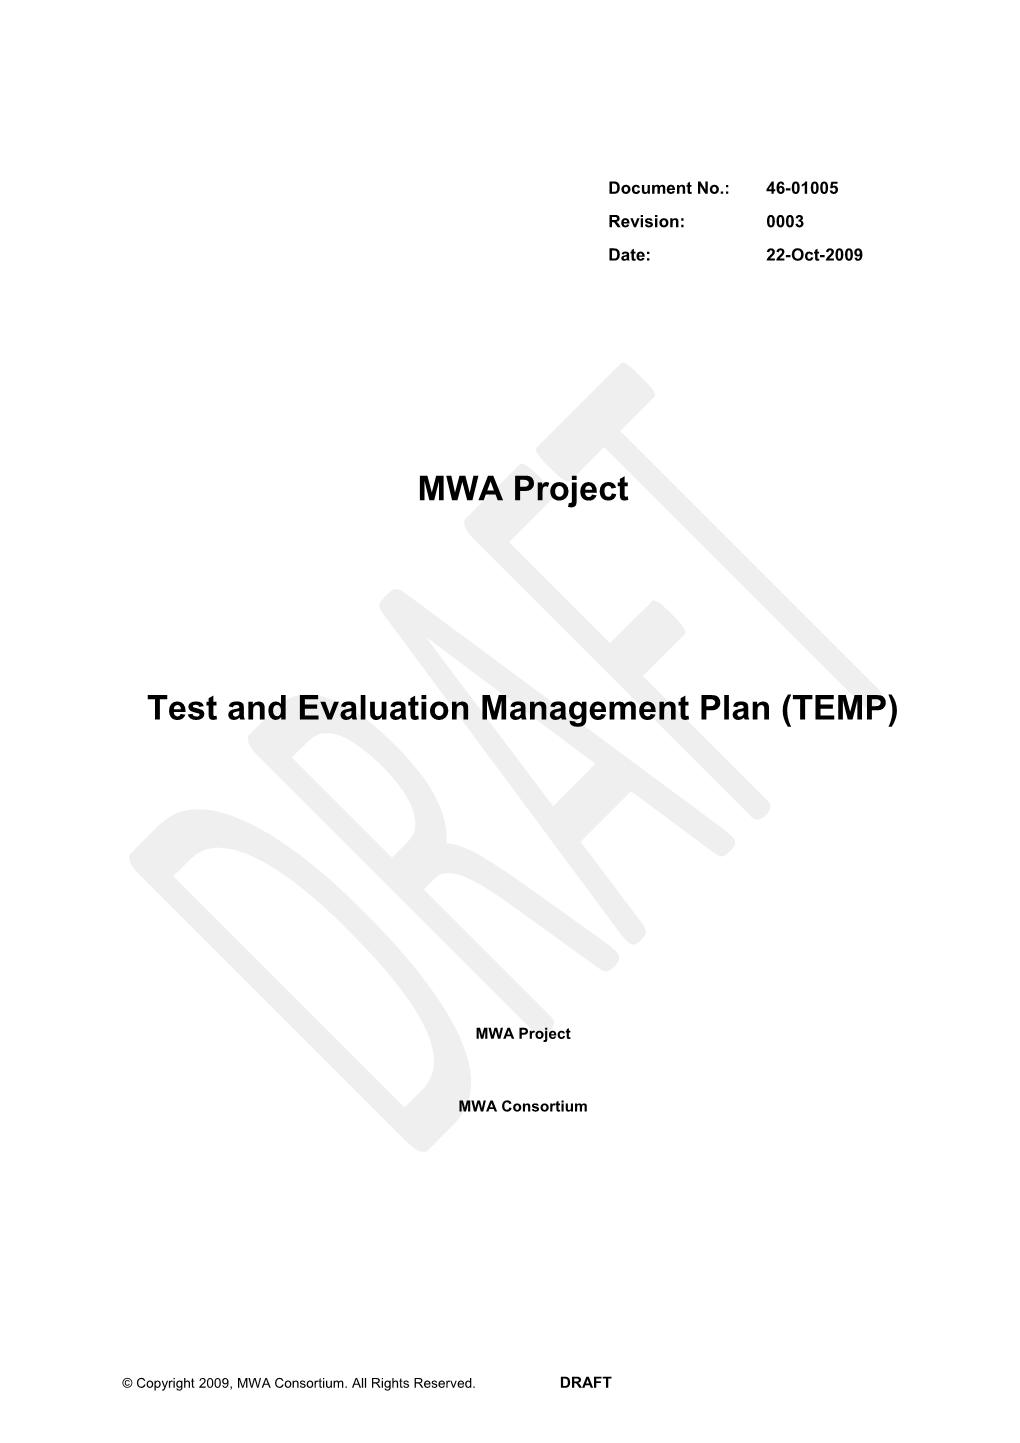 Test and Evaluation Management Plan (TEMP)